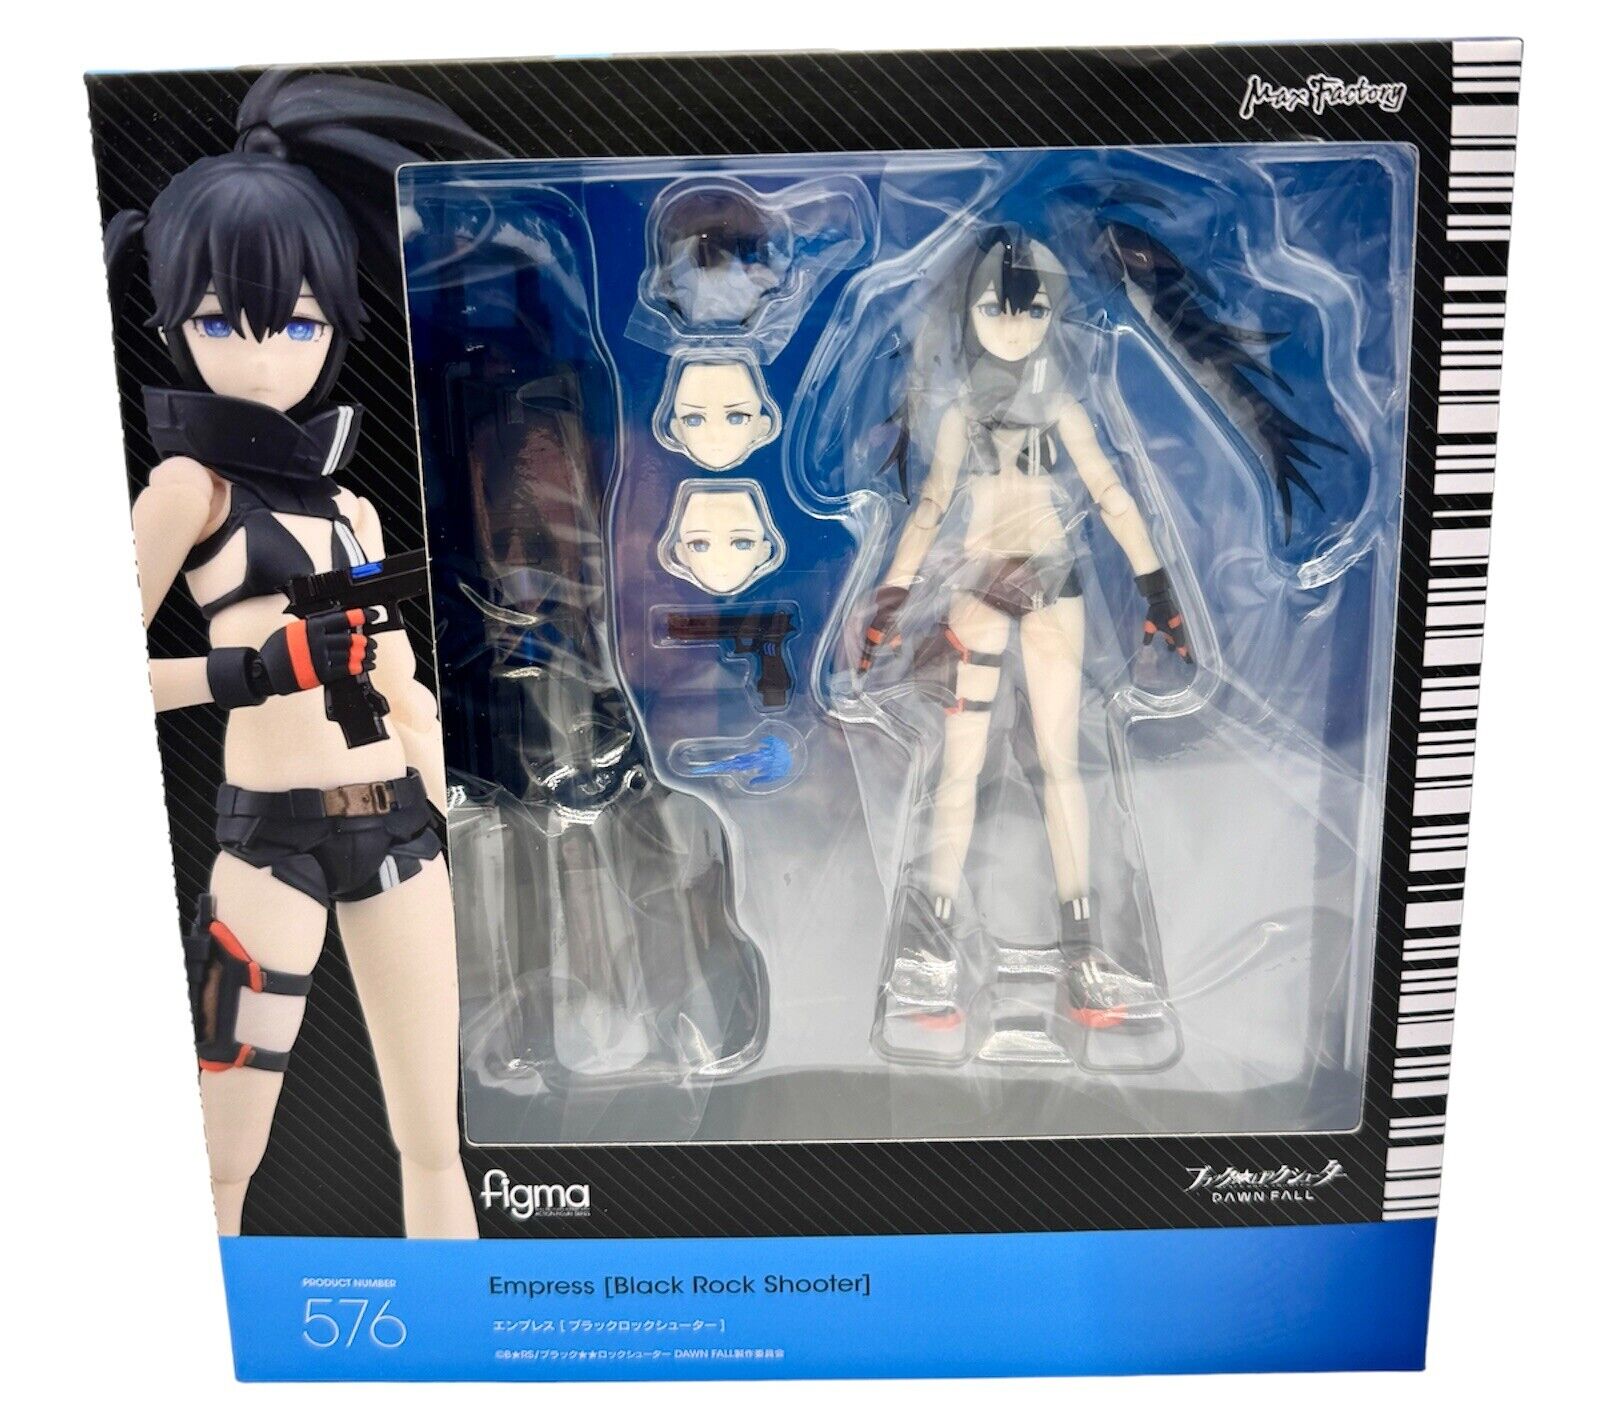 Max Factory Black Rock Shooter Dawn Fall Empress 576 Figma Action Figure US New